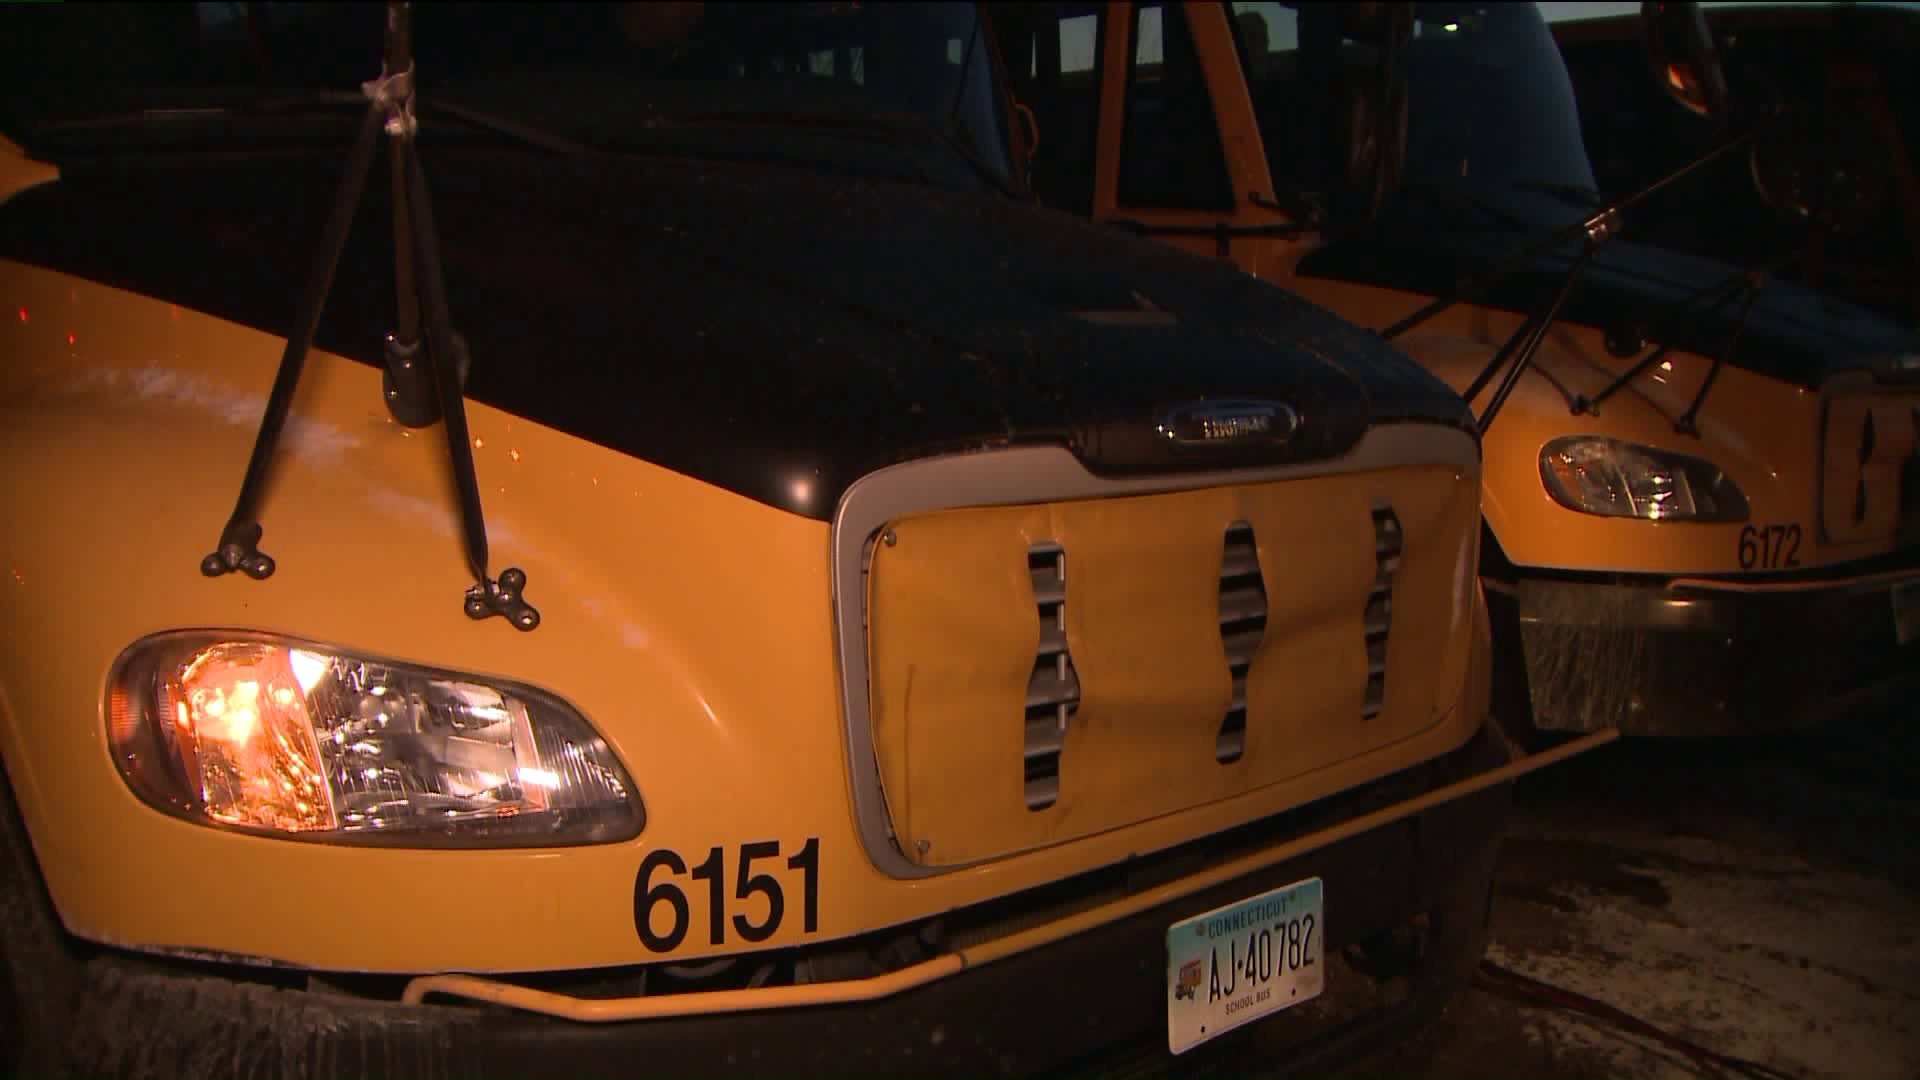 Cold creates challenges for school bus companies